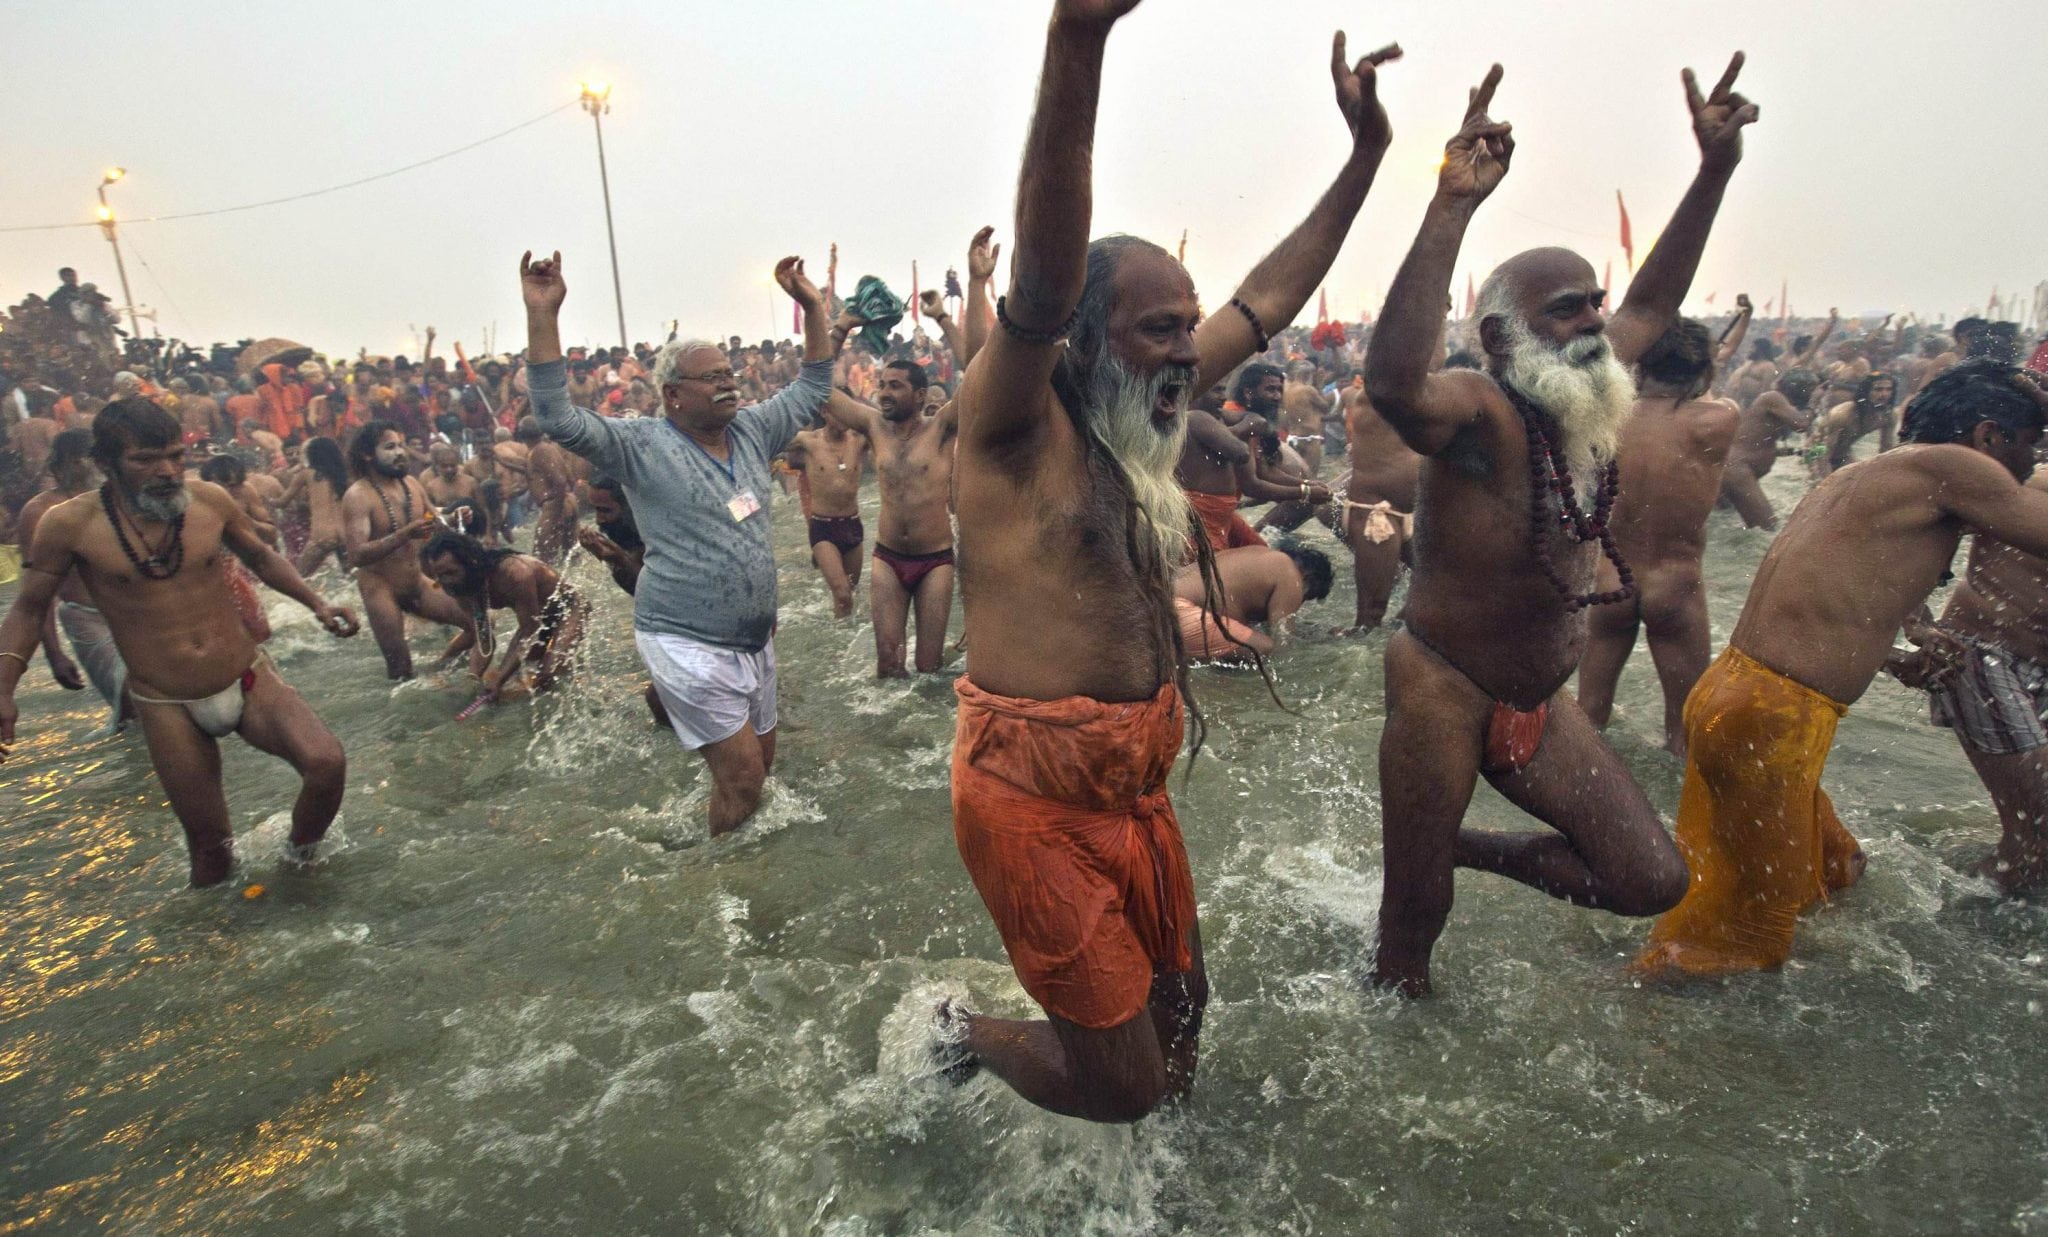 Sadhus or Hindu holymen attend the first 'Shahi Snan' at the ongoing "Kumbh Mela", or Pitcher Festival, in Allahabad, India. 